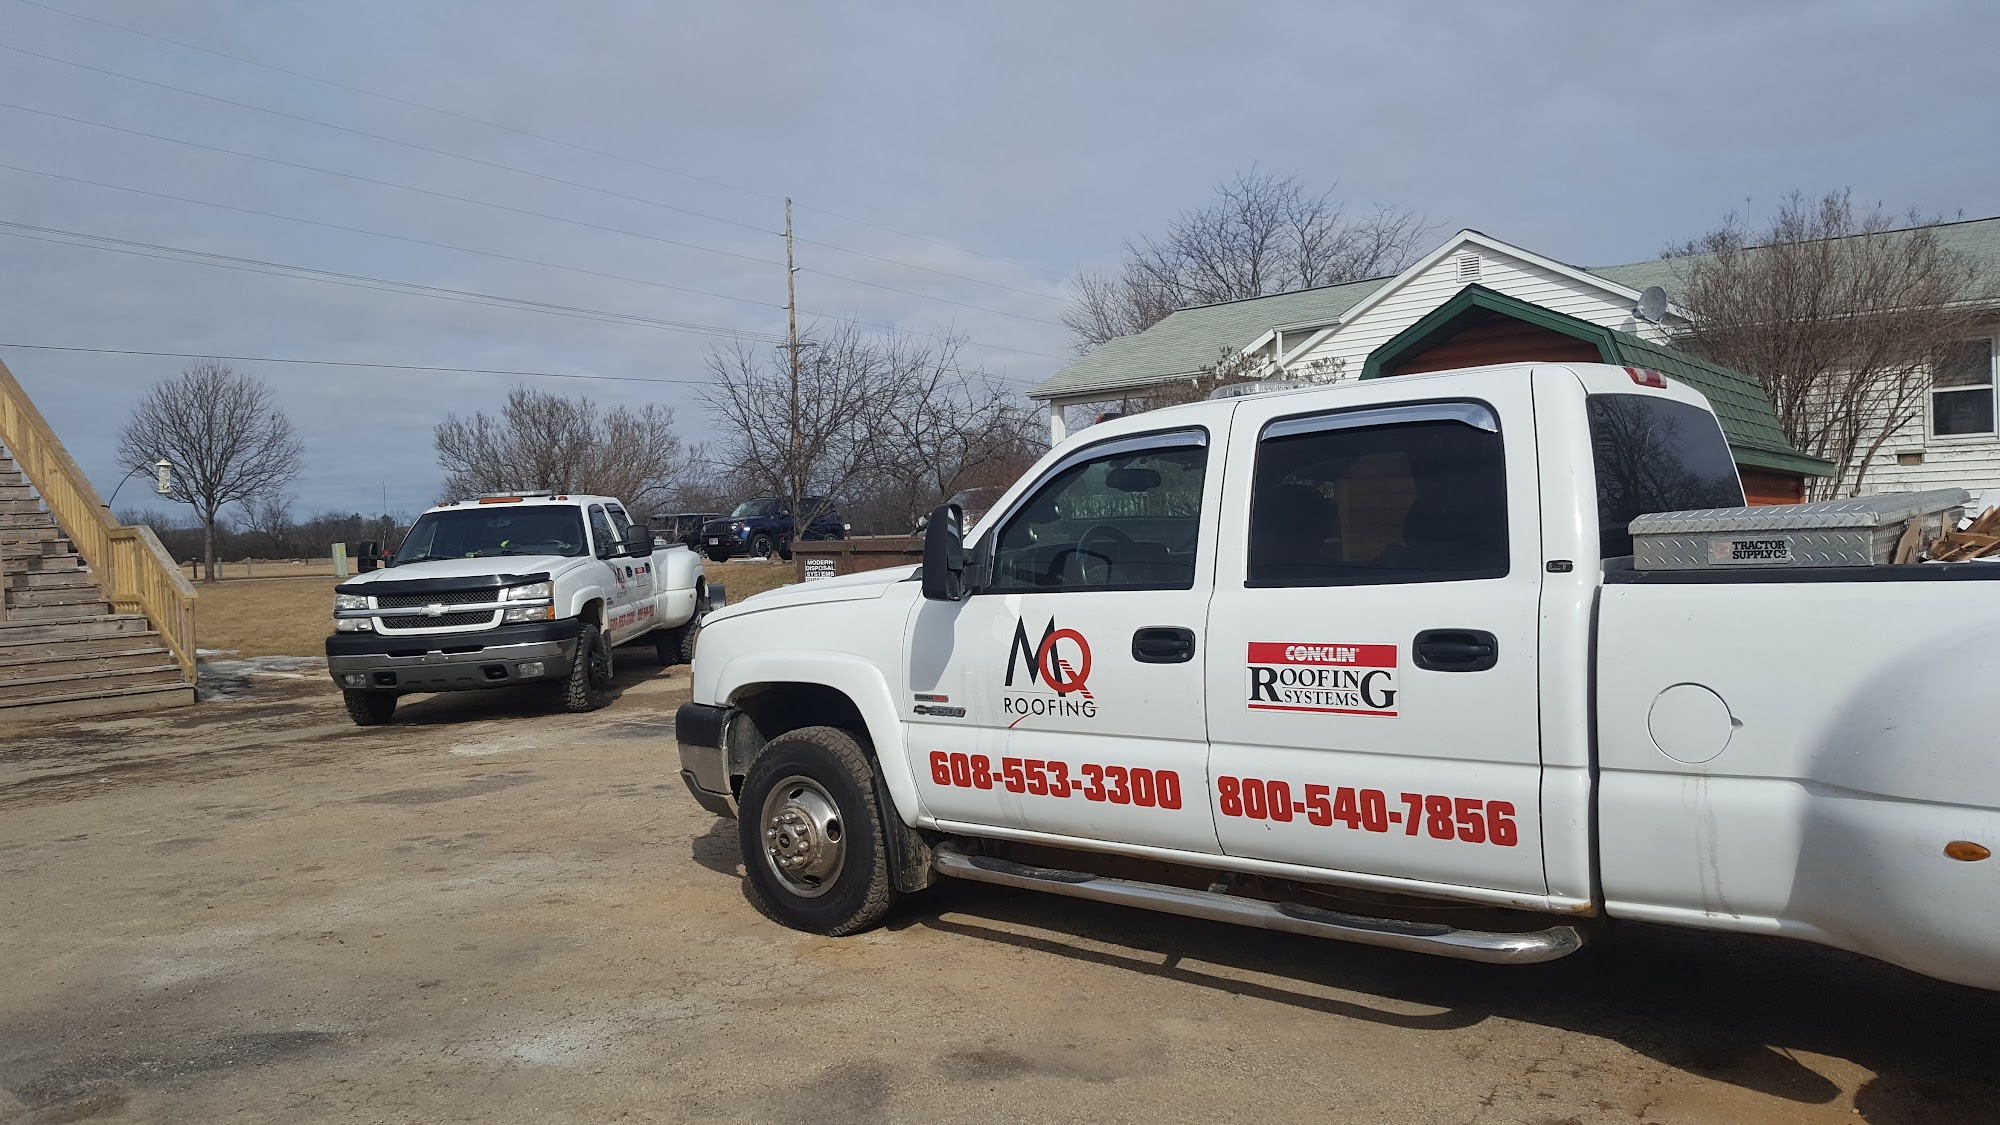 MQ Roofing